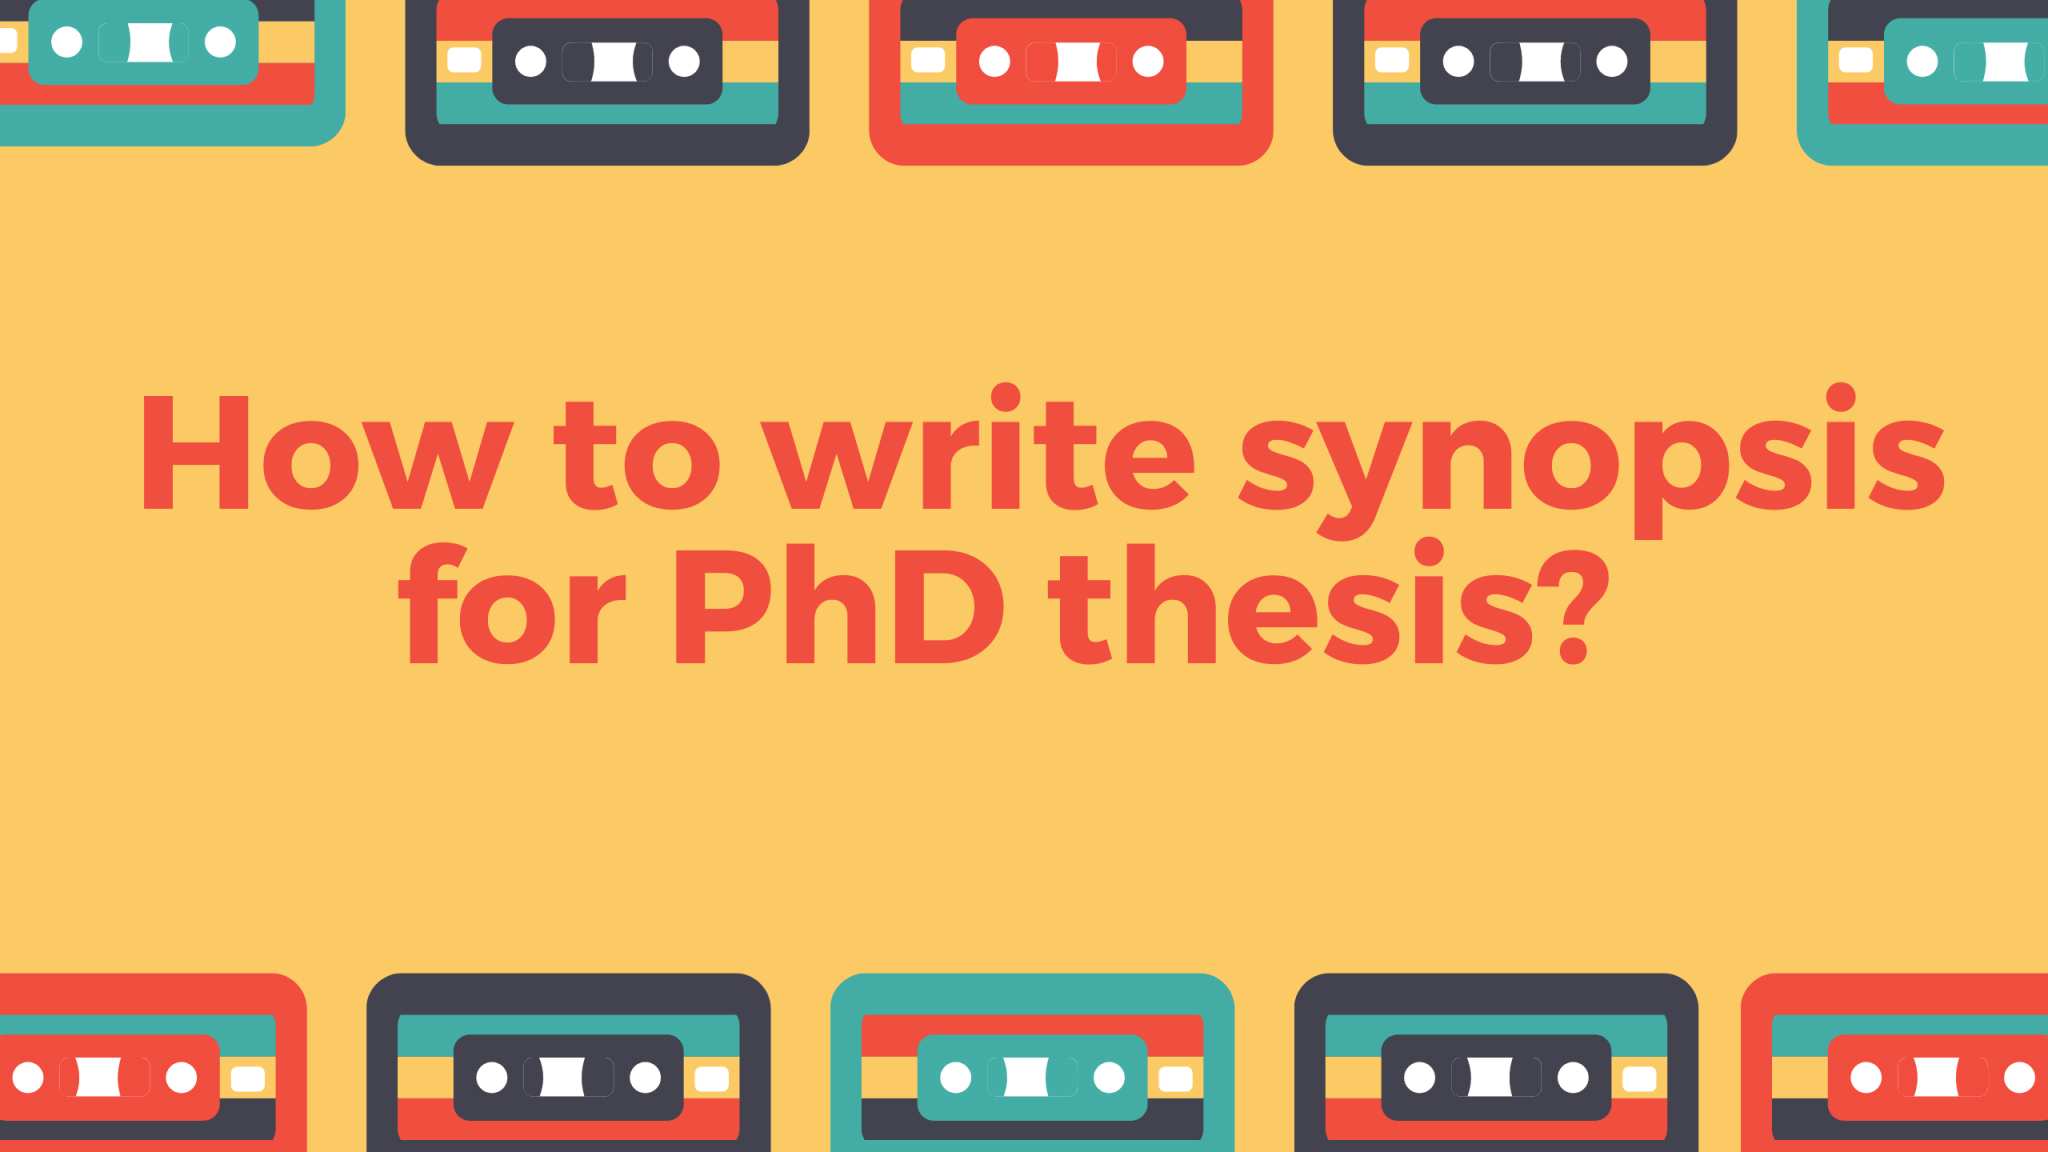 phd synopsis download